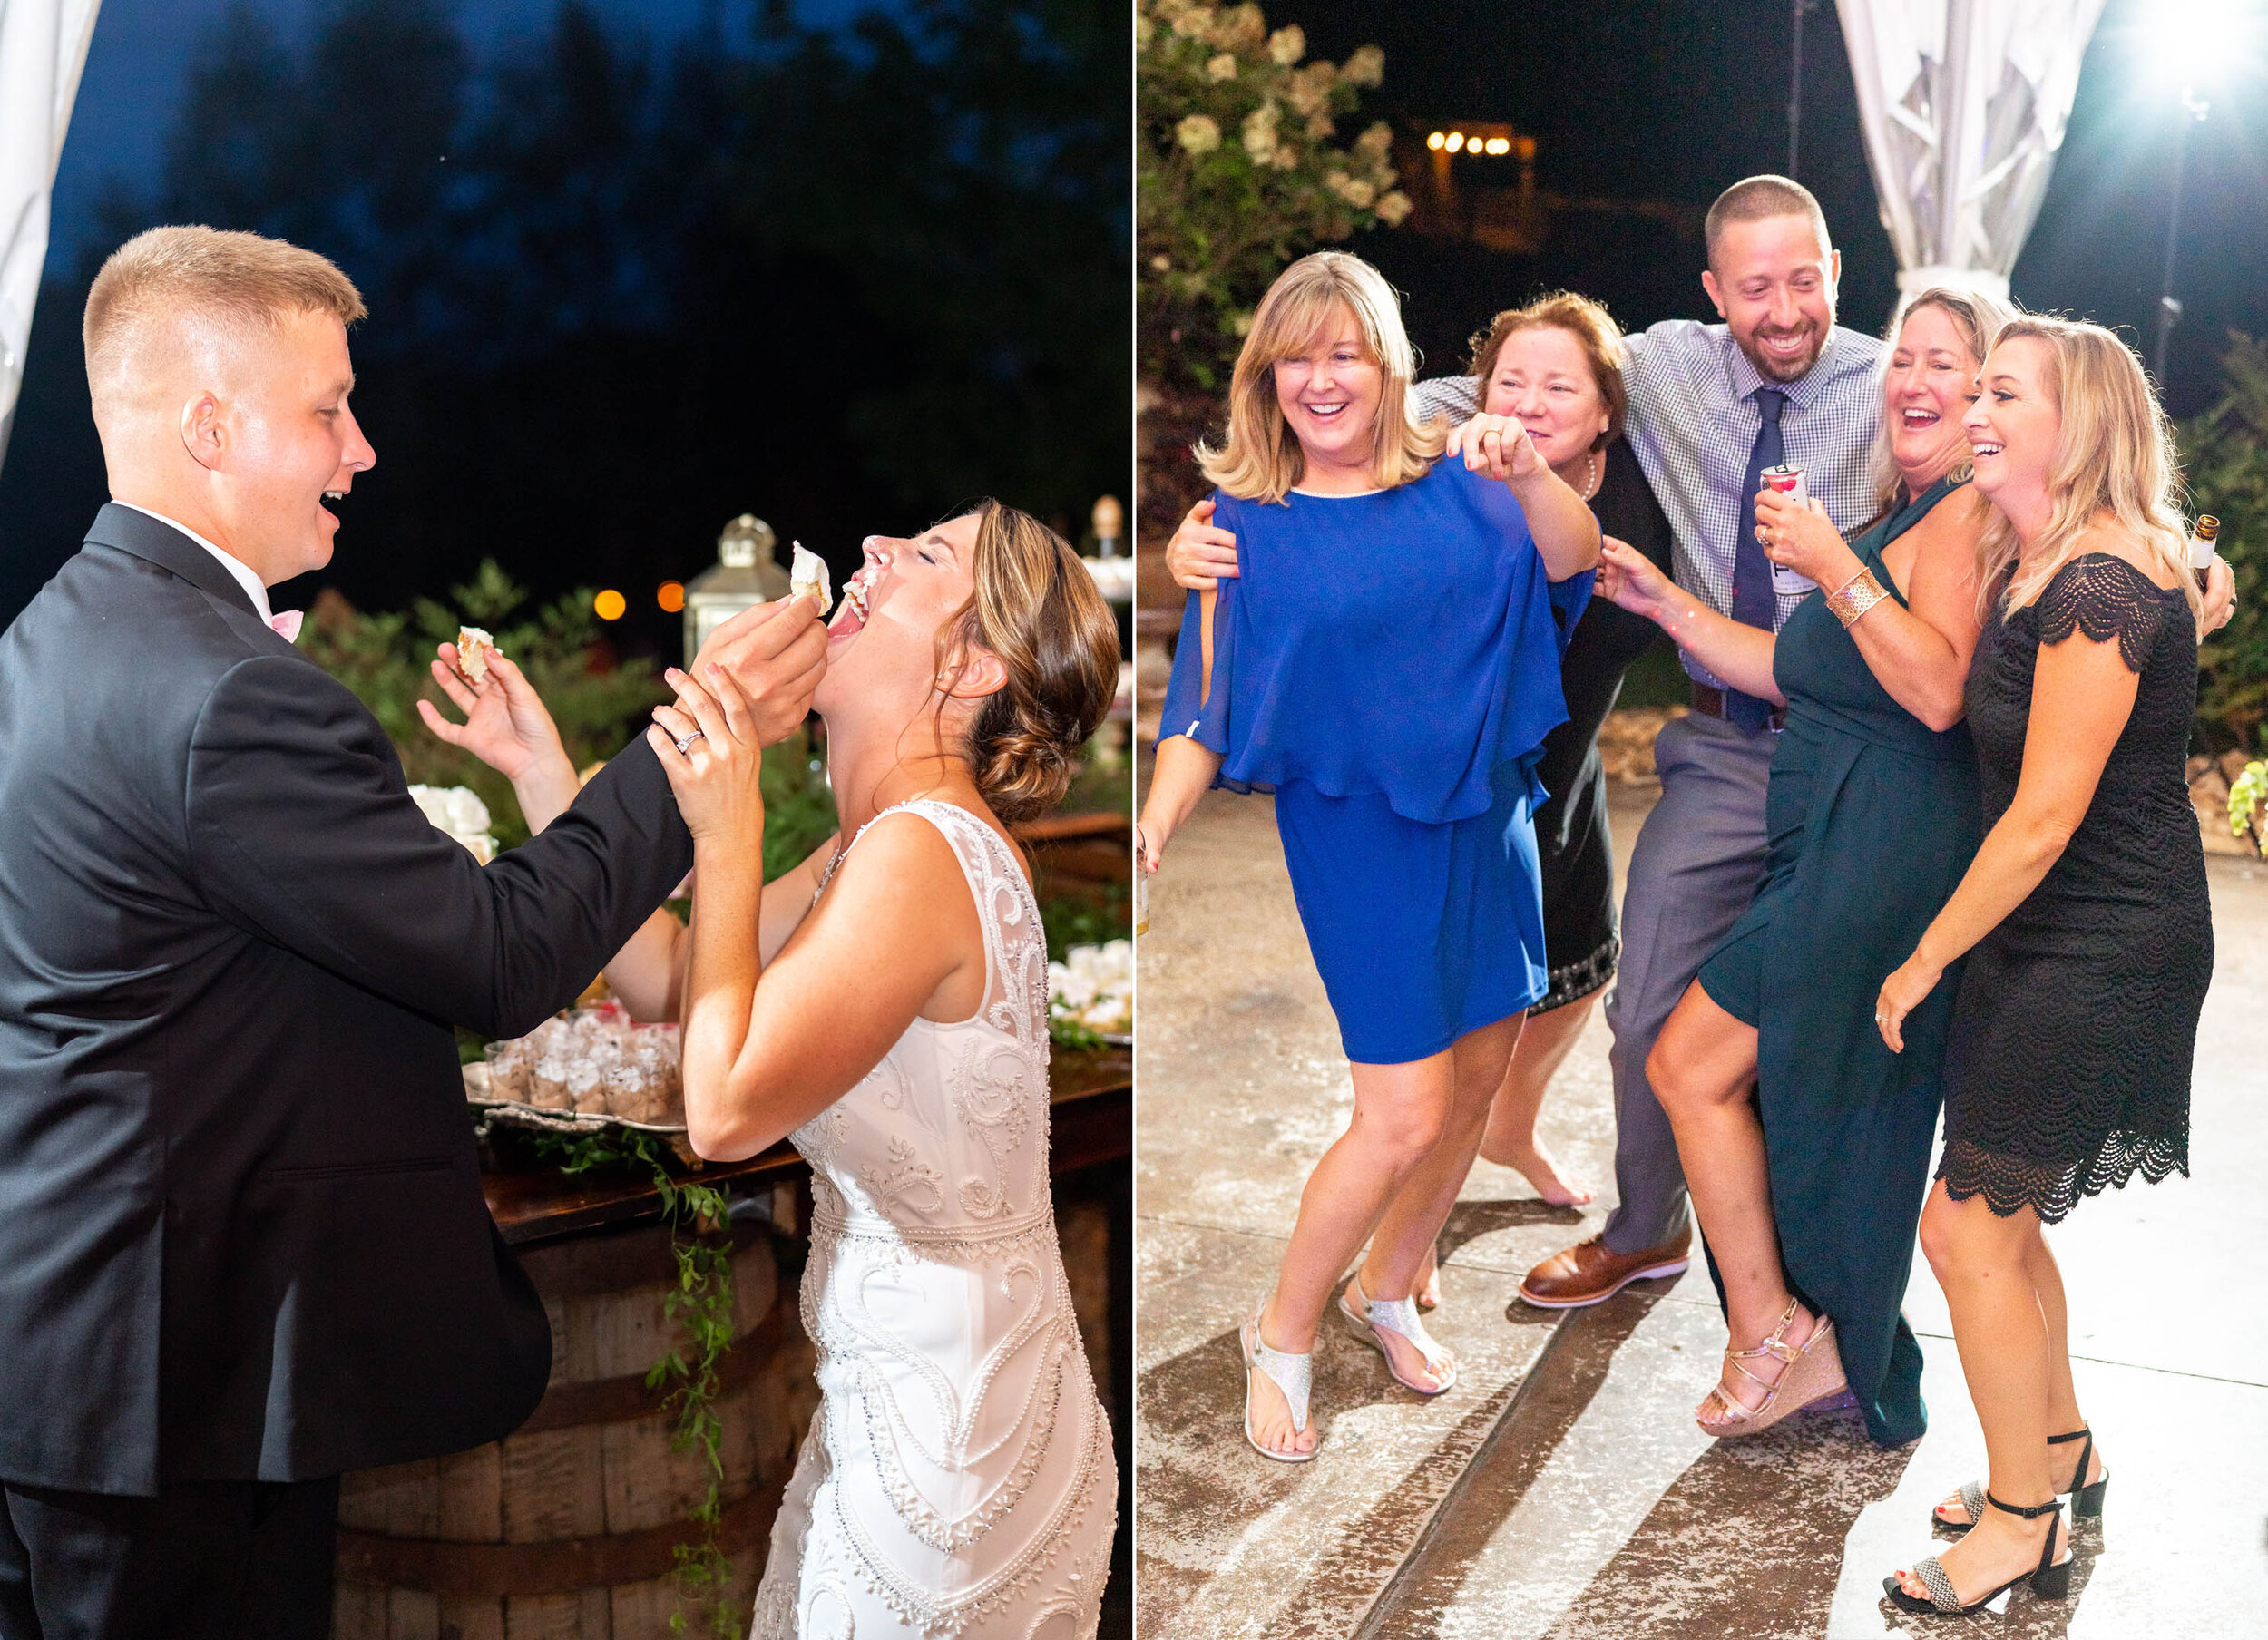 Cake cutting and dancing guests at Glen Ellen Farm at night